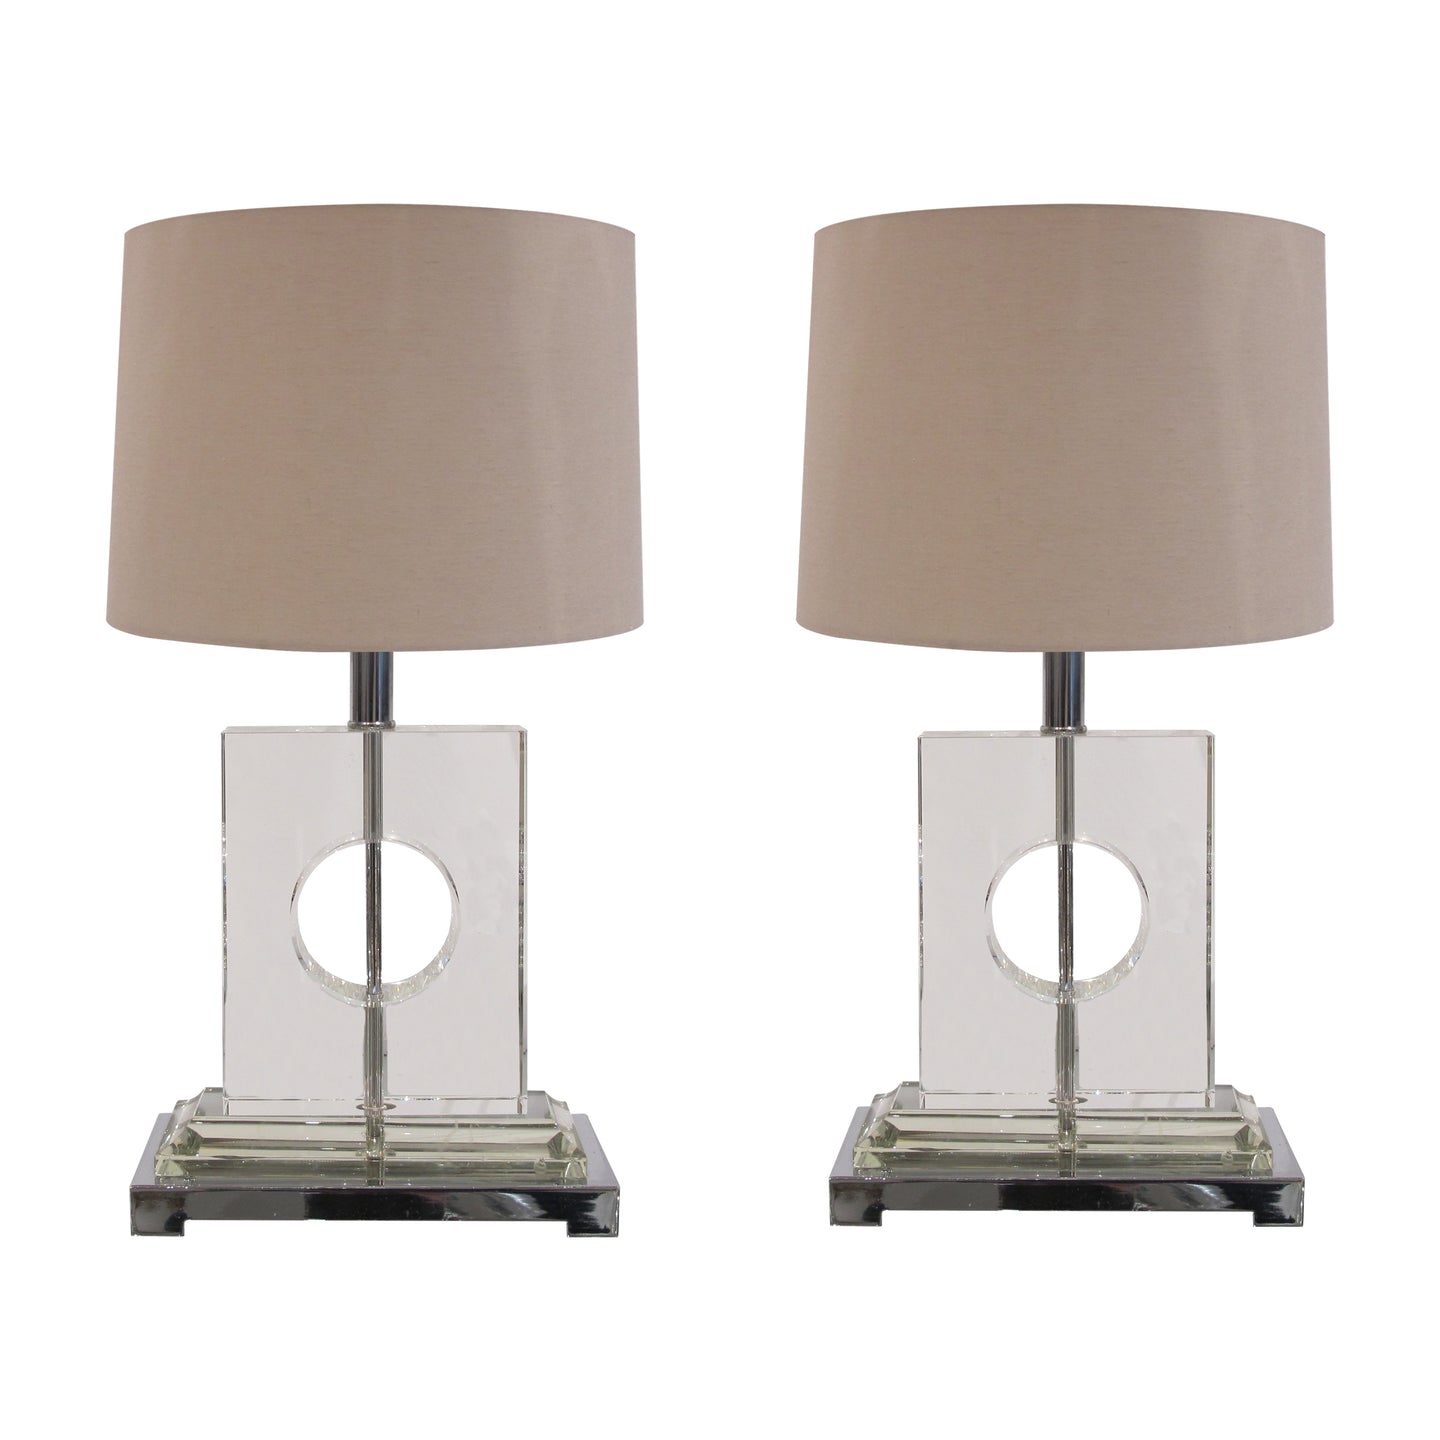 1970s Italian stylish Lucite and chrome pair of table lamps